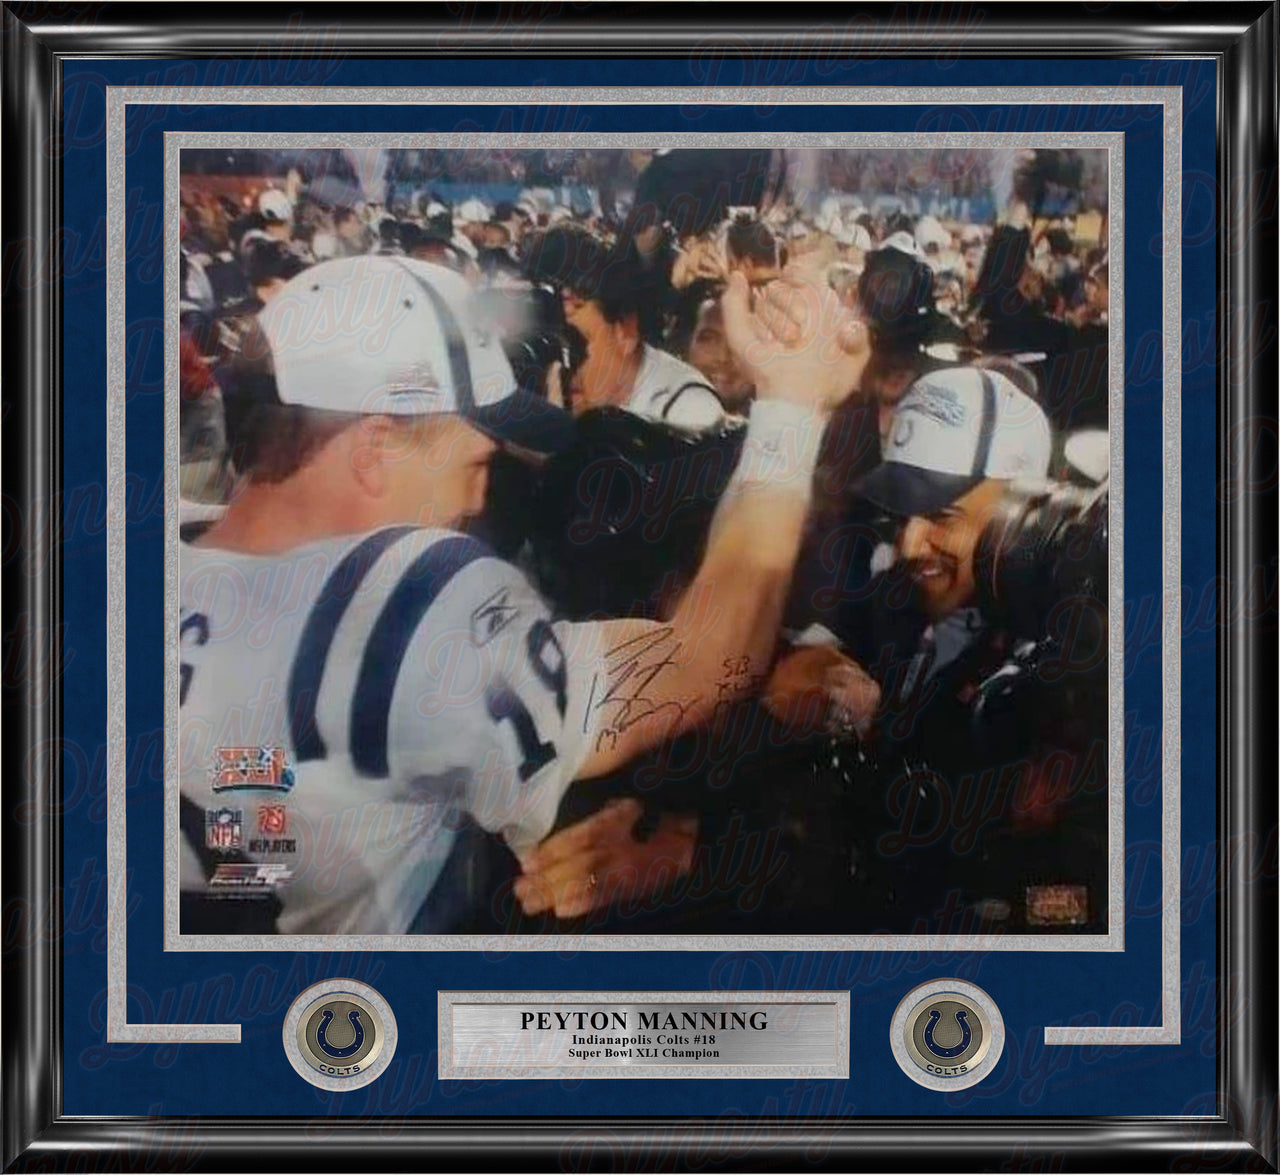 Peyton Manning Indianapolis Colts Autographed Super Bowl XLI 16x20 Framed Photo - Dynasty Sports & Framing 